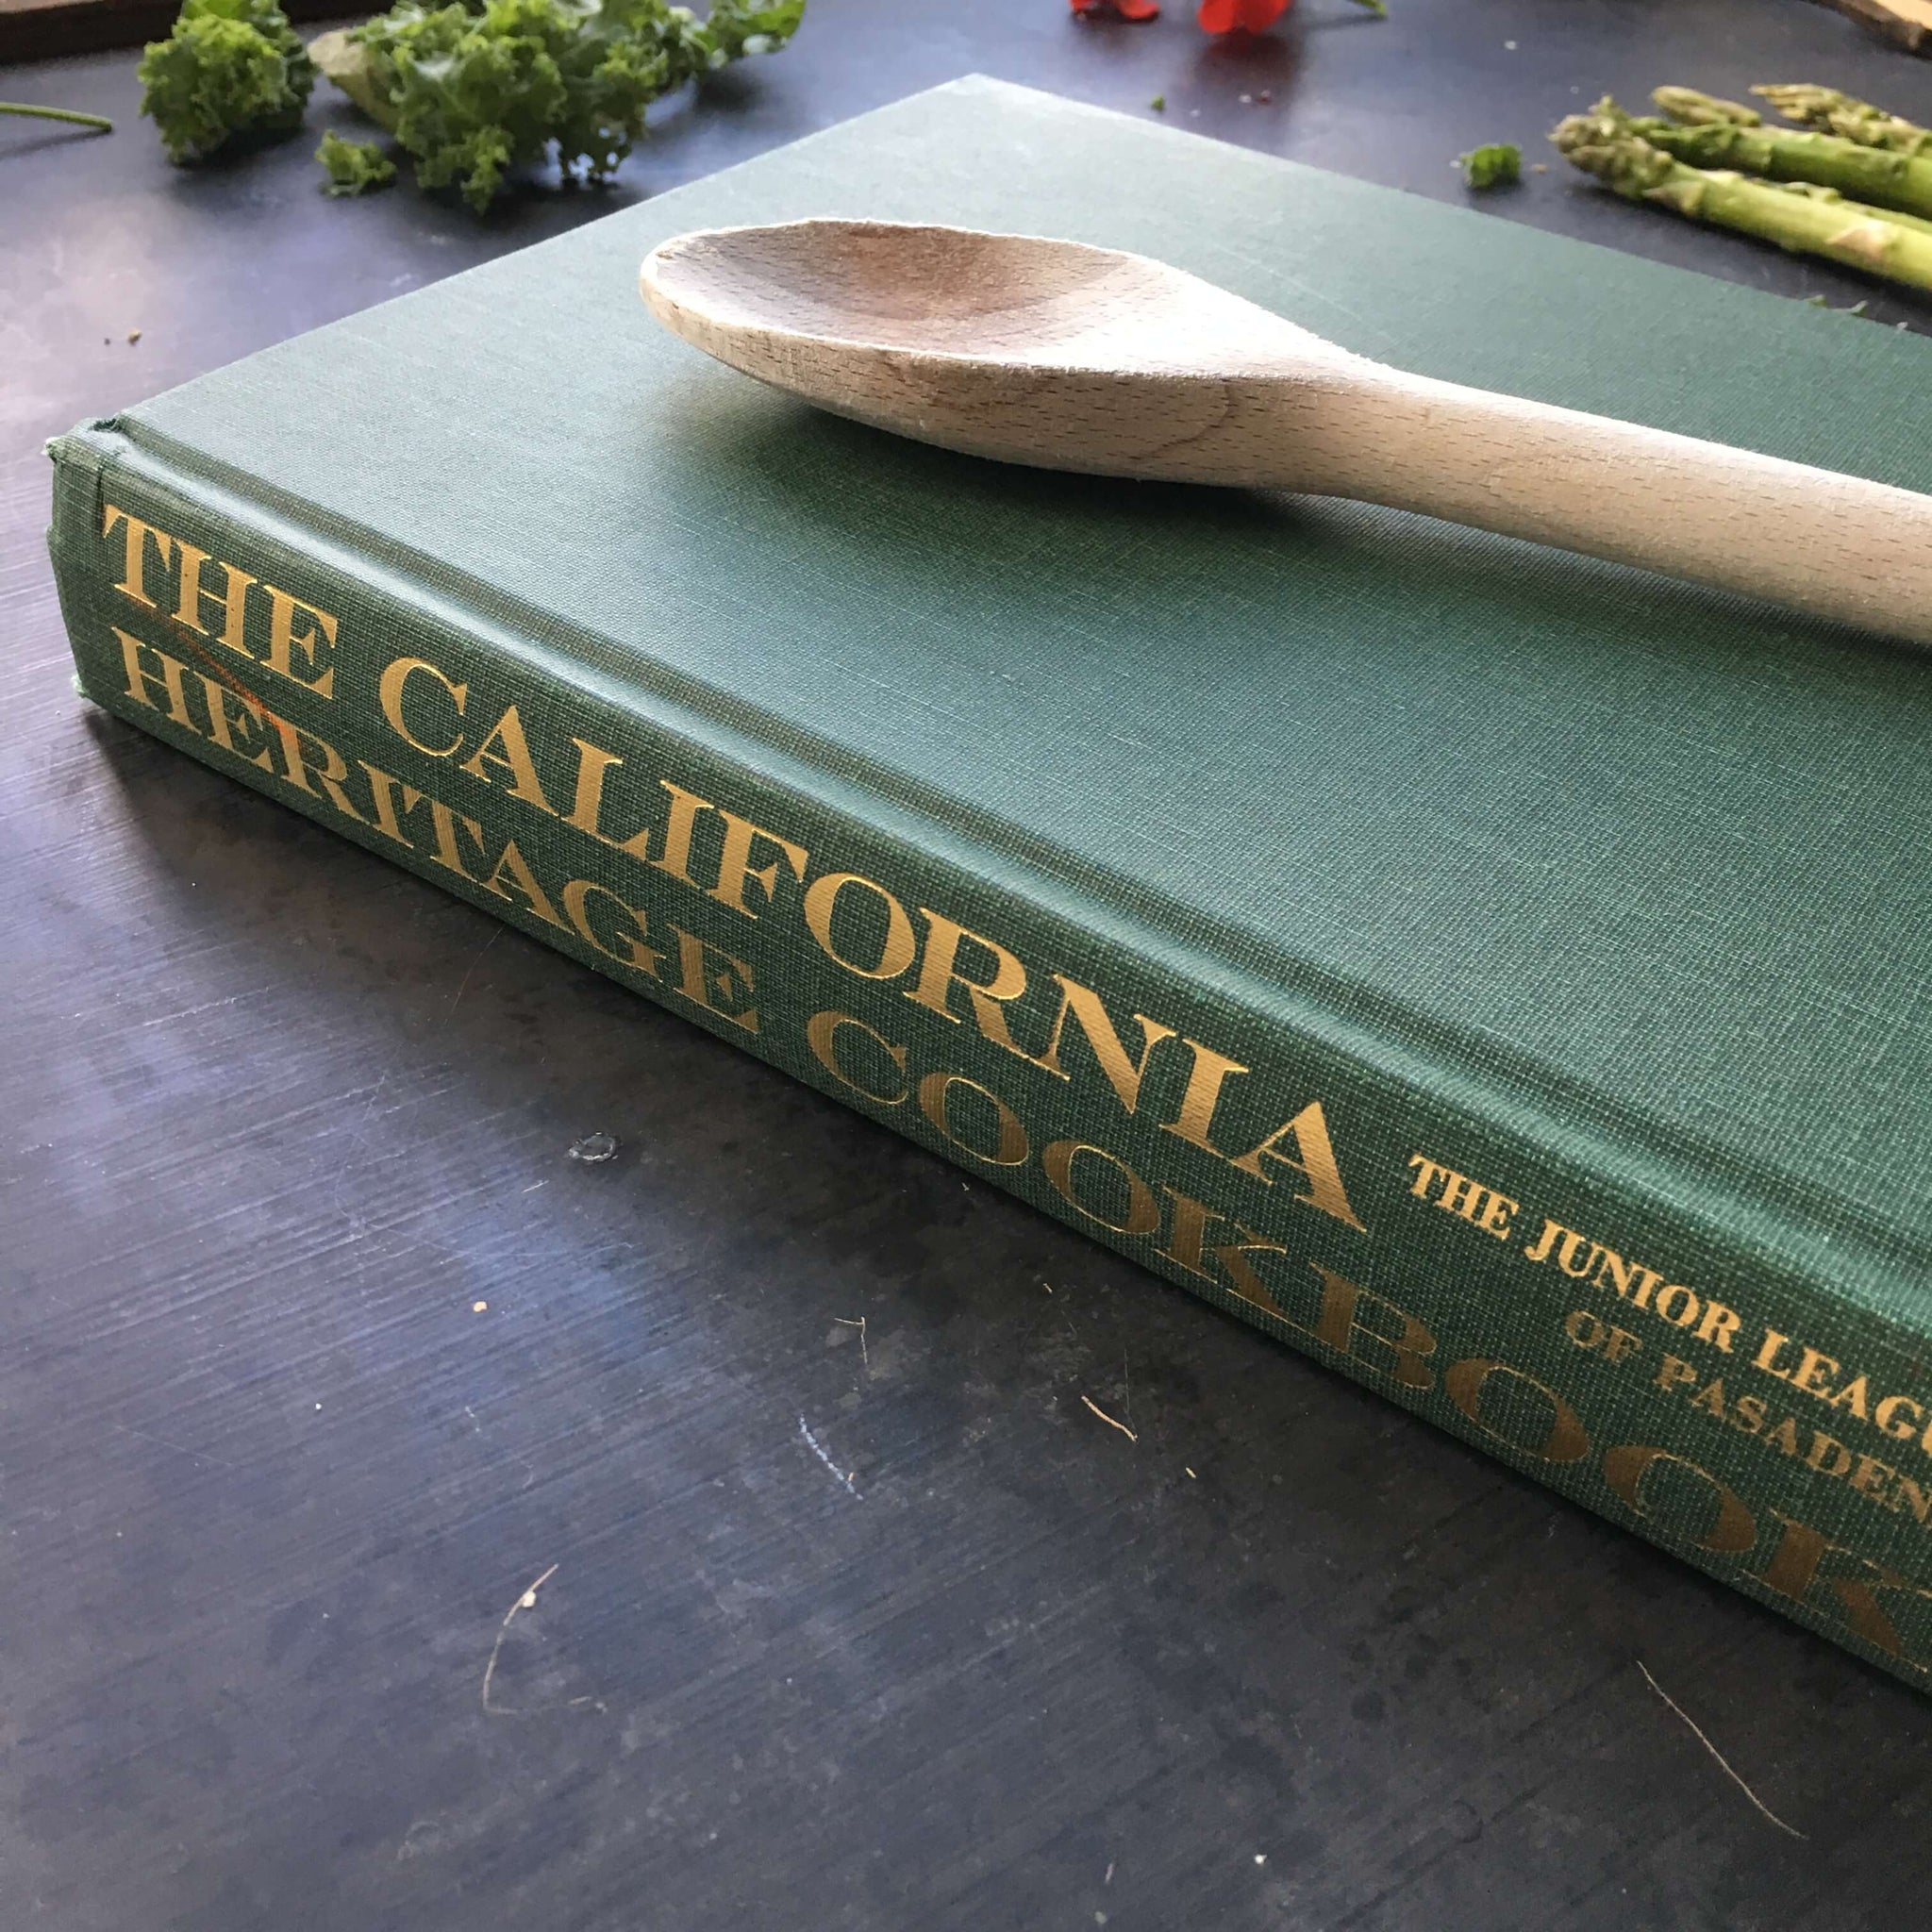 The California Heritage Cookbook - The Junior League of Pasadena - 1976 First Edition